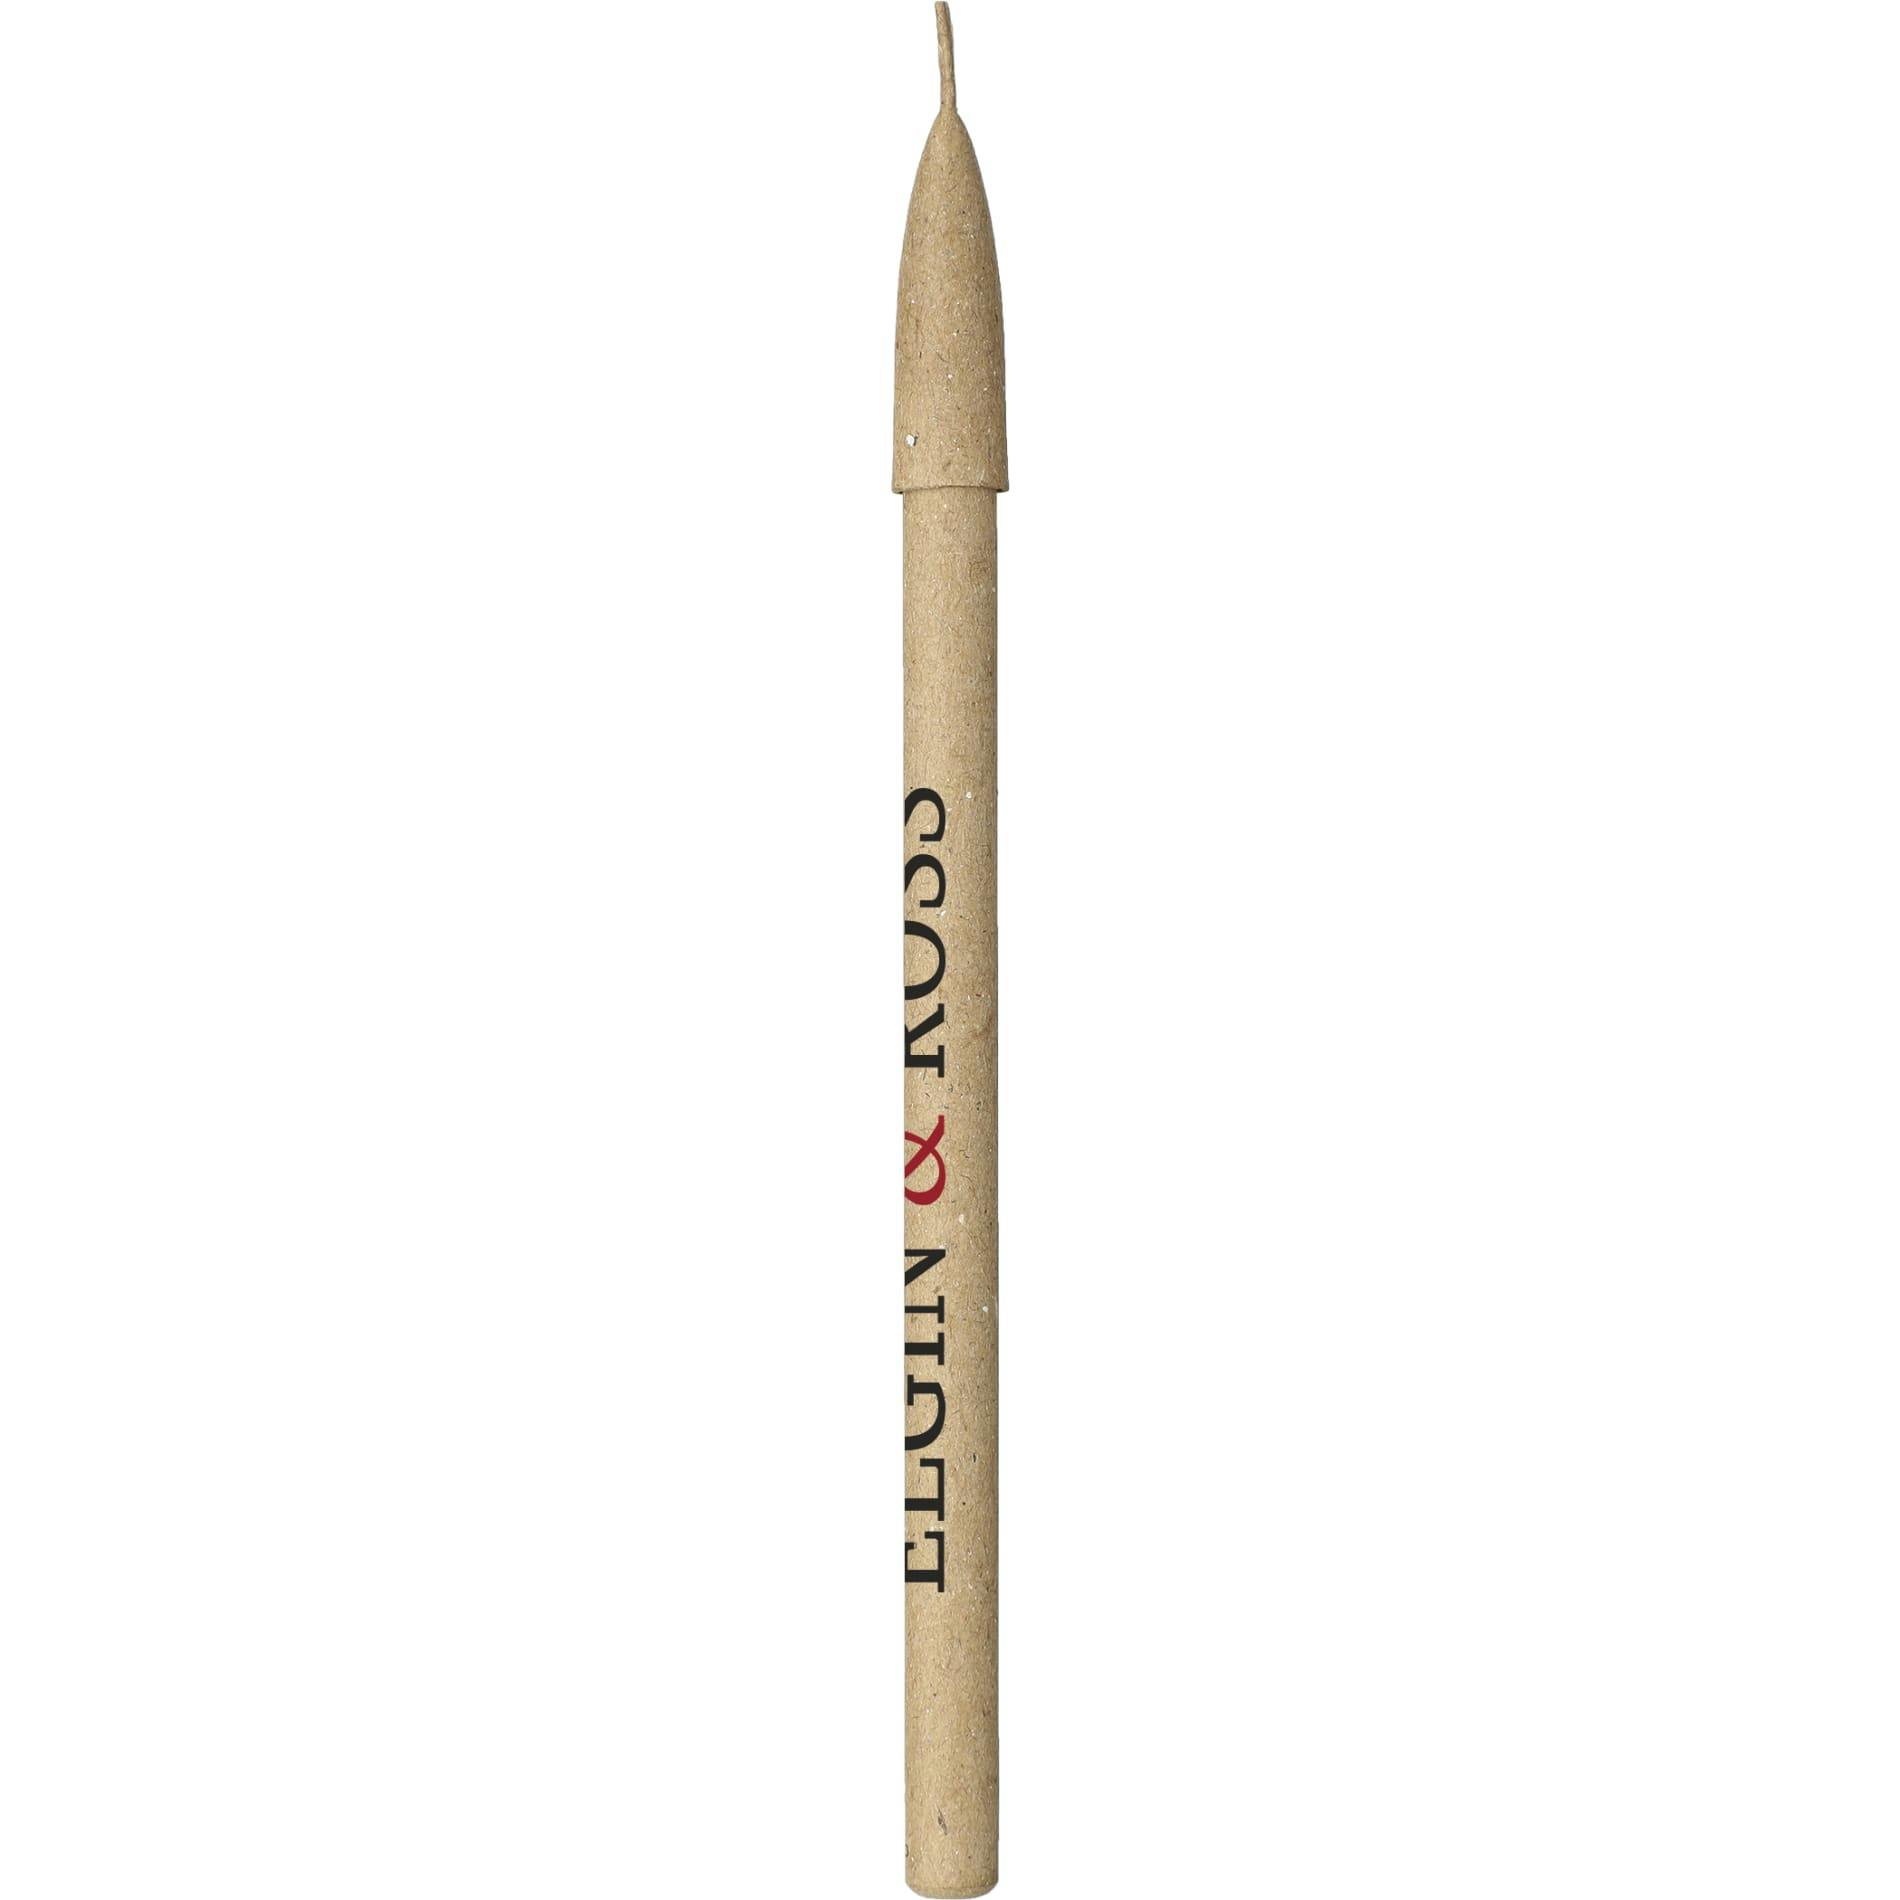 Eco Recycled Gel Paper Pen - additional Image 1